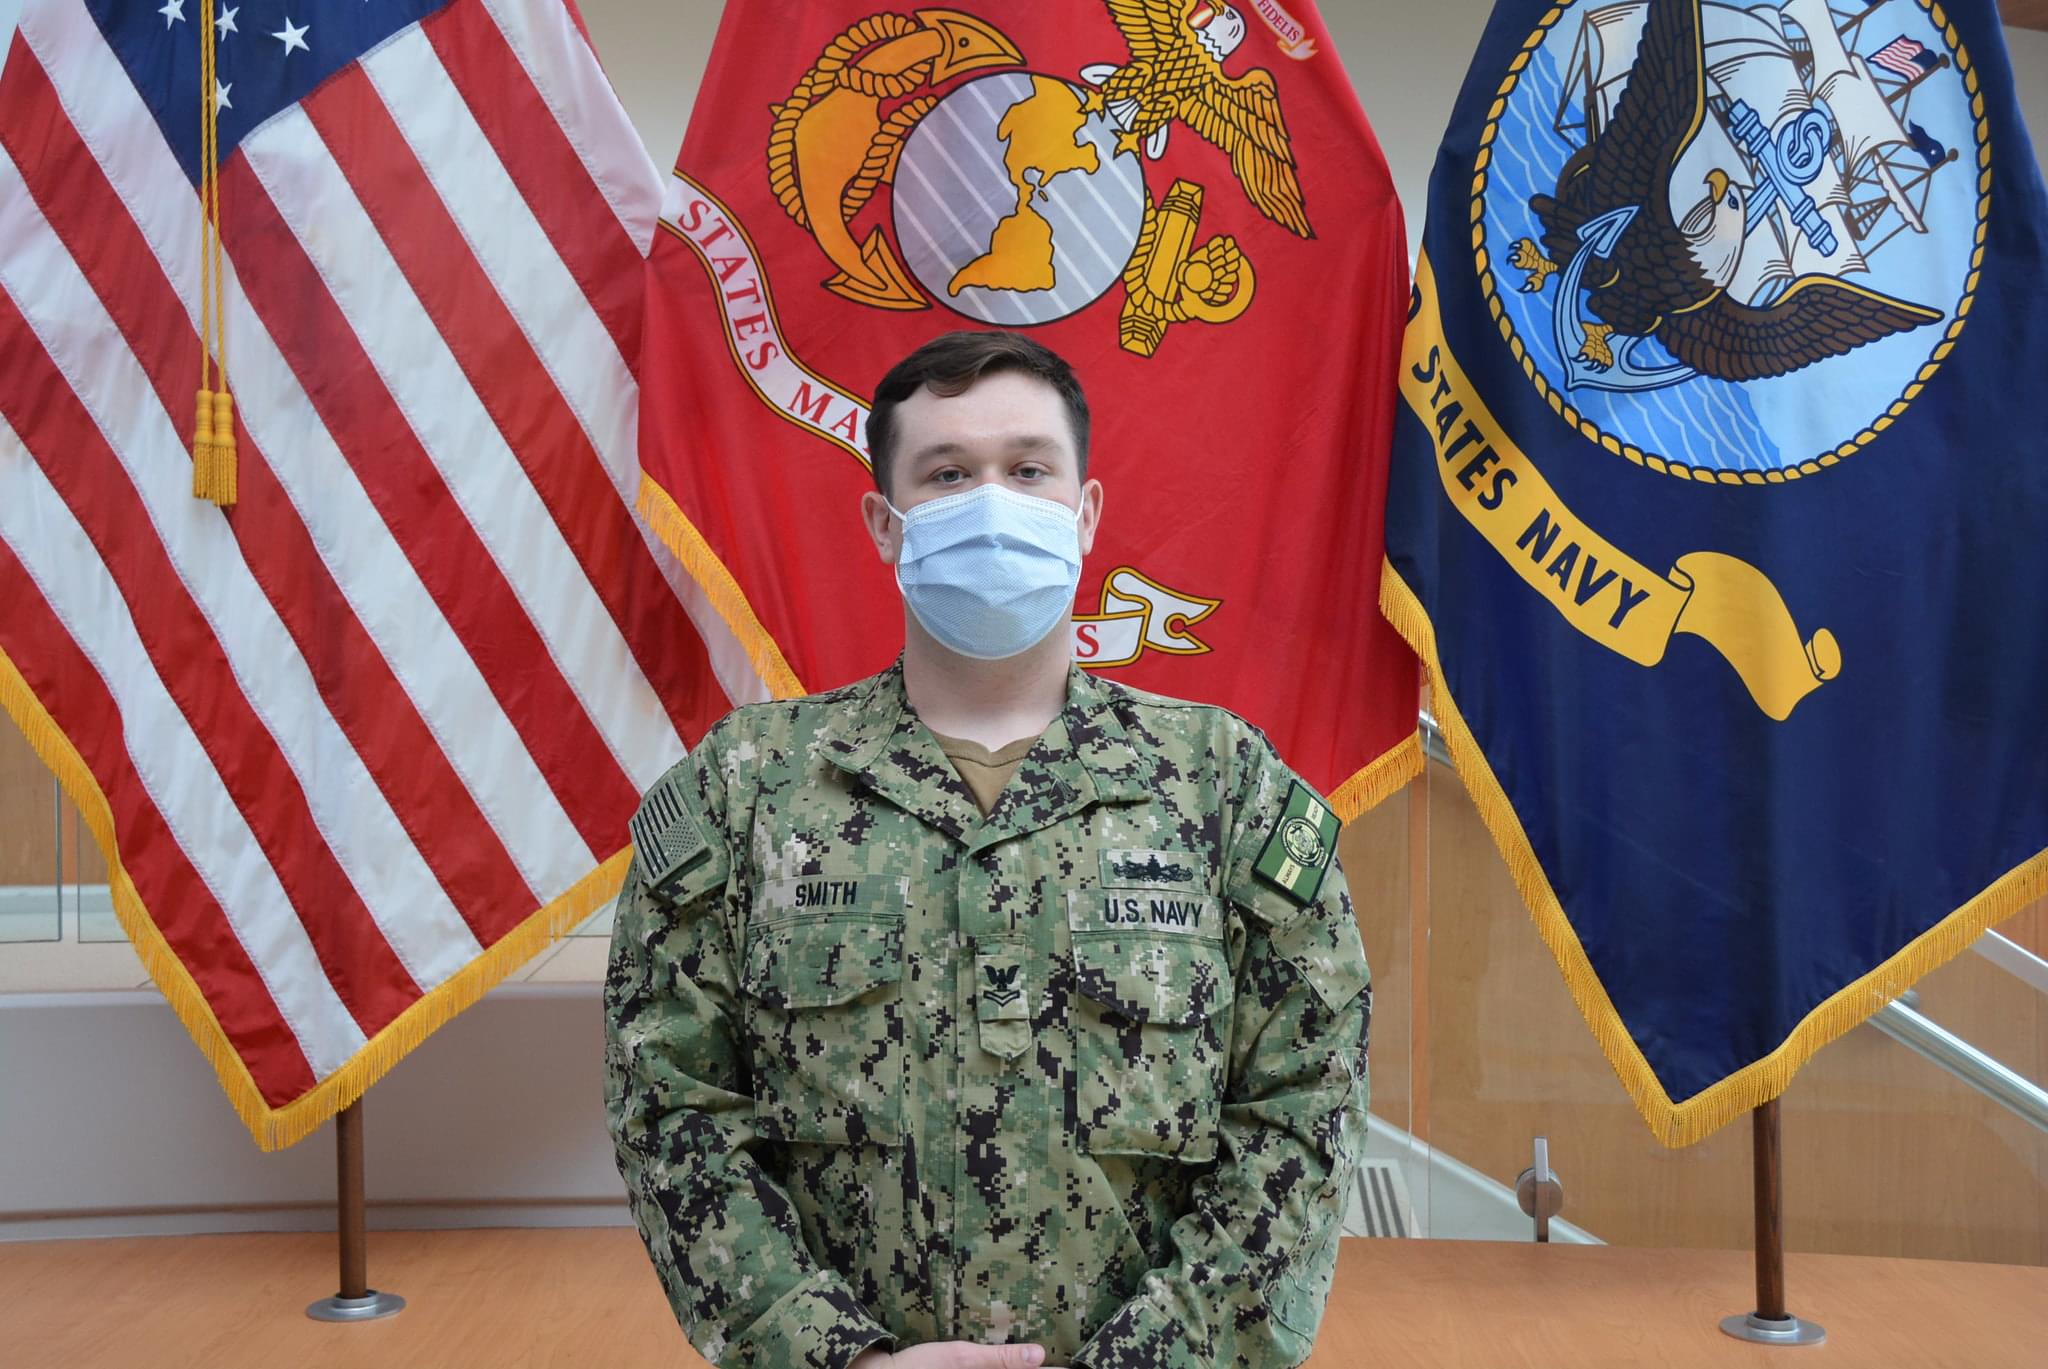 Newport News Native supports Hospital Corps on front lines of U.S. Navy Coronavirus fight